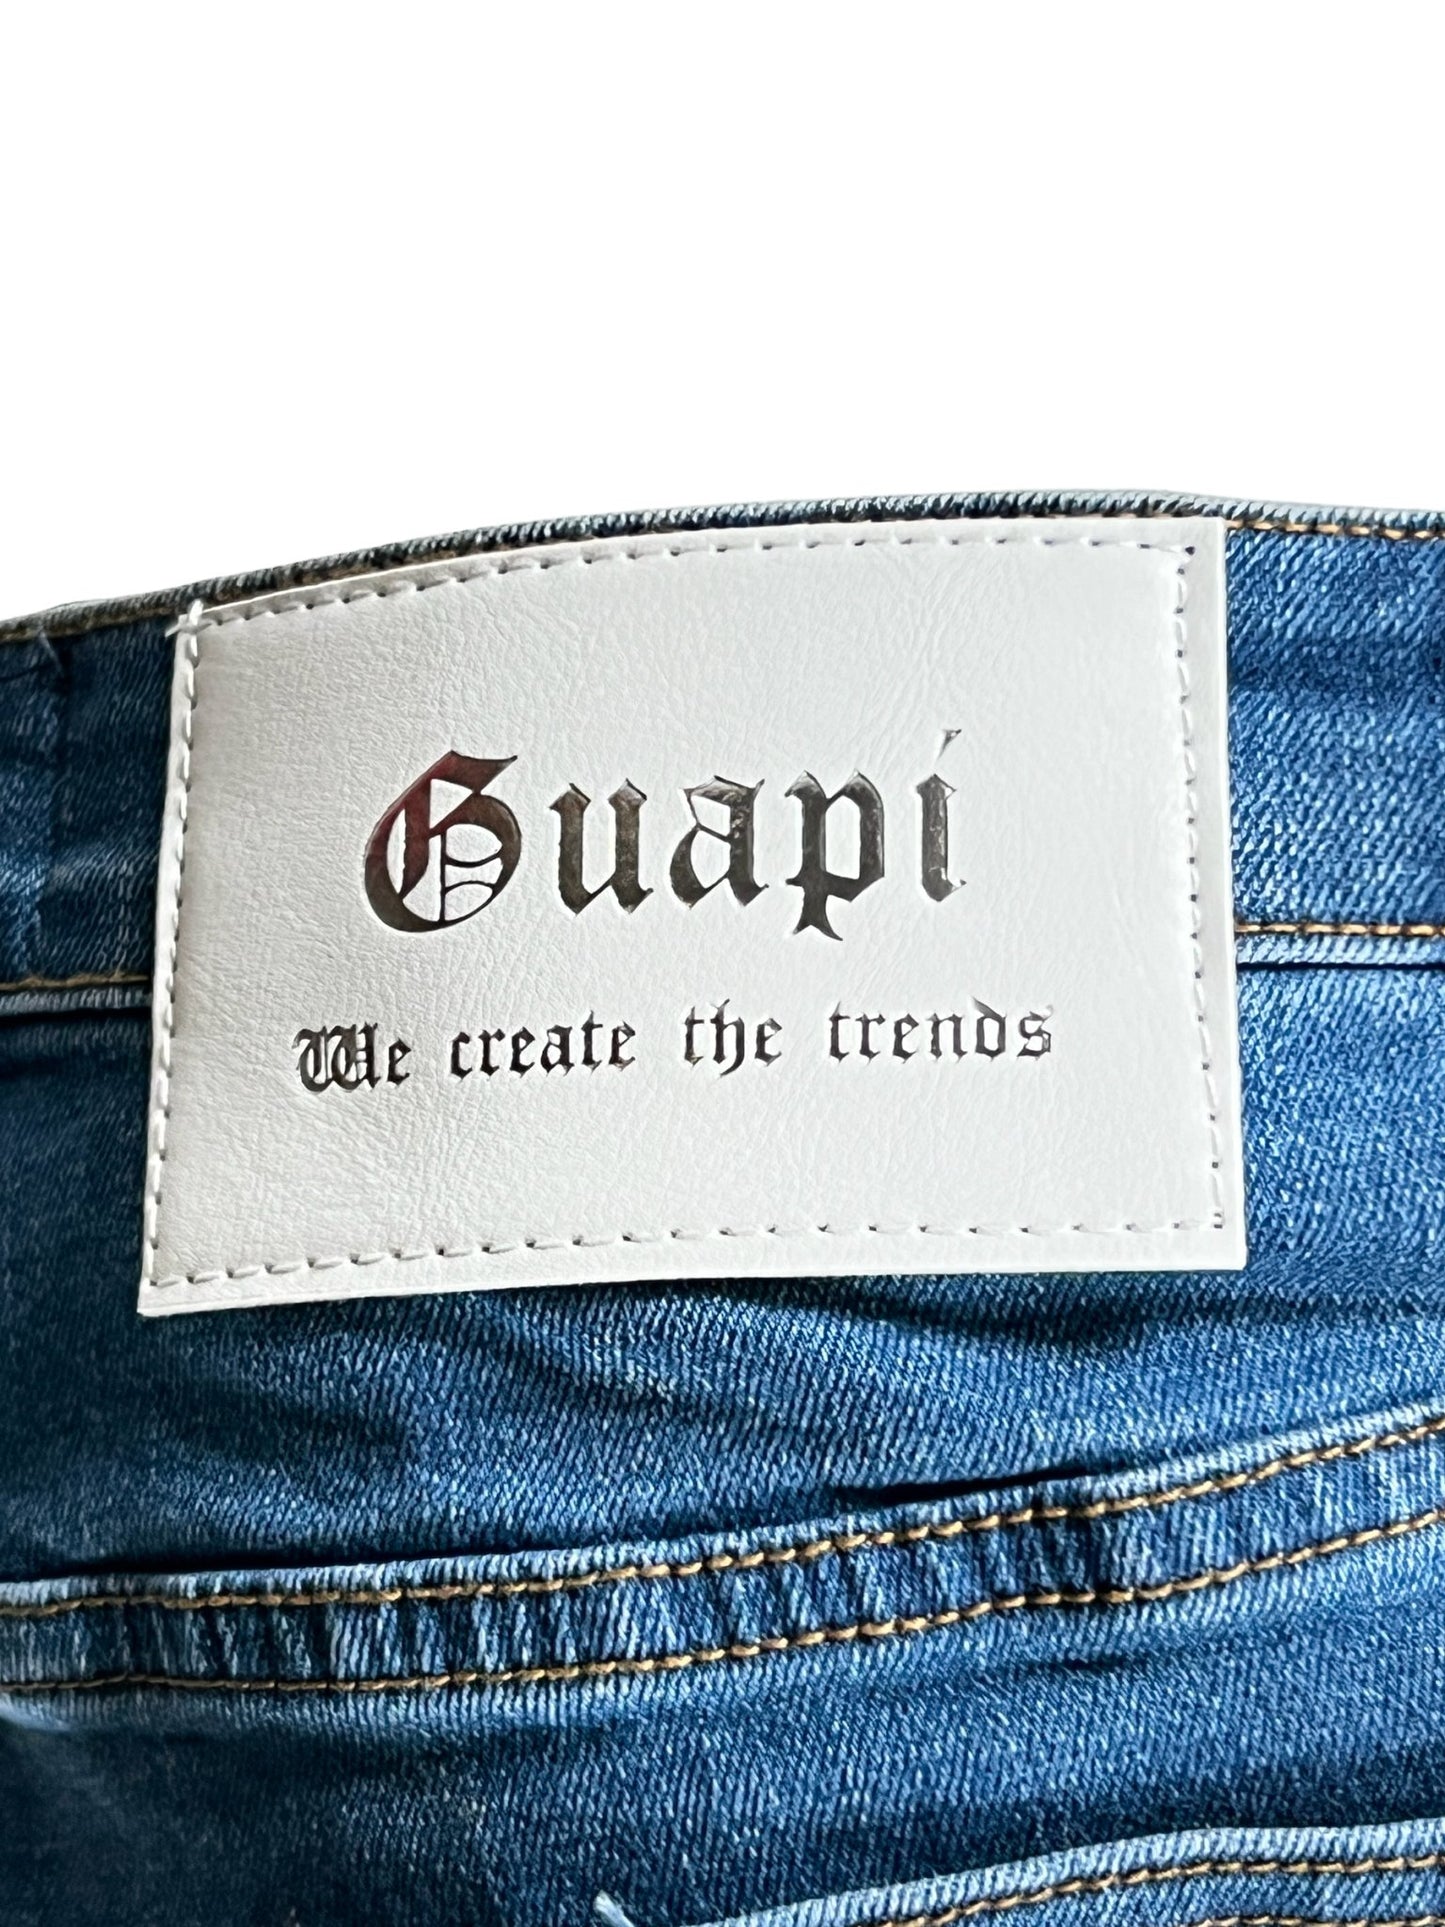 GUAPI VINTAGE BLUE WAVY DENIM with "guapi we create the trends" text on stretch denim fabric.